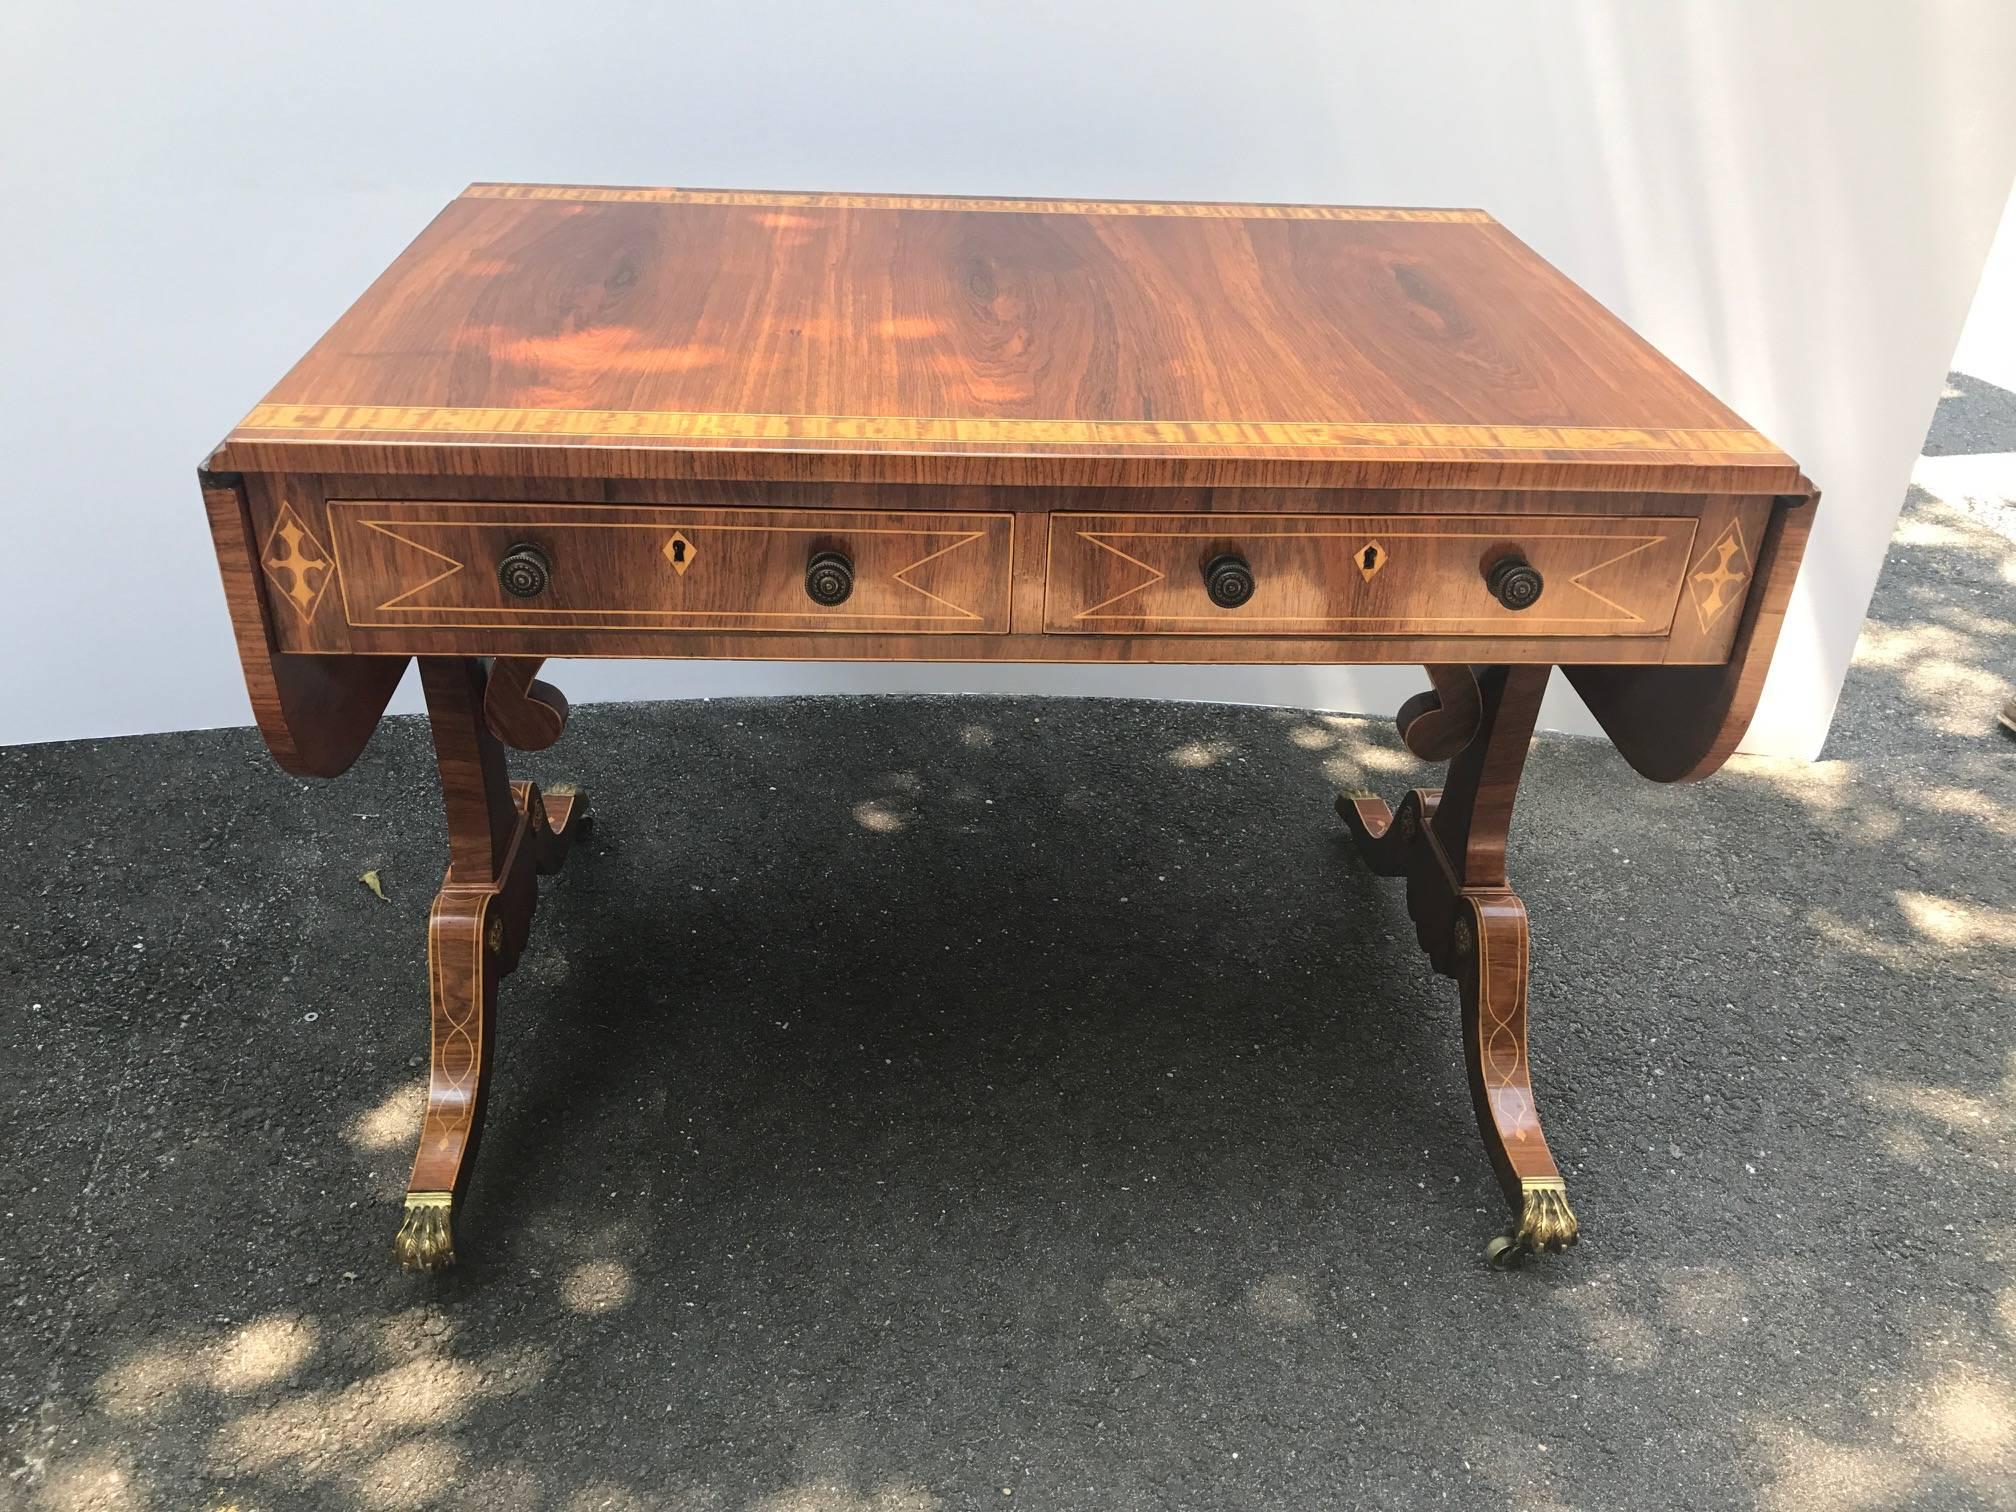 Graceful and elegant rosewood and satinwood inlaid drop leaf console desk. Extraordinary craftsmanship and cabinet maker made in the English Regency style. The figured wood grain with satinwood banding on the top and intertwining pencil inlay on the